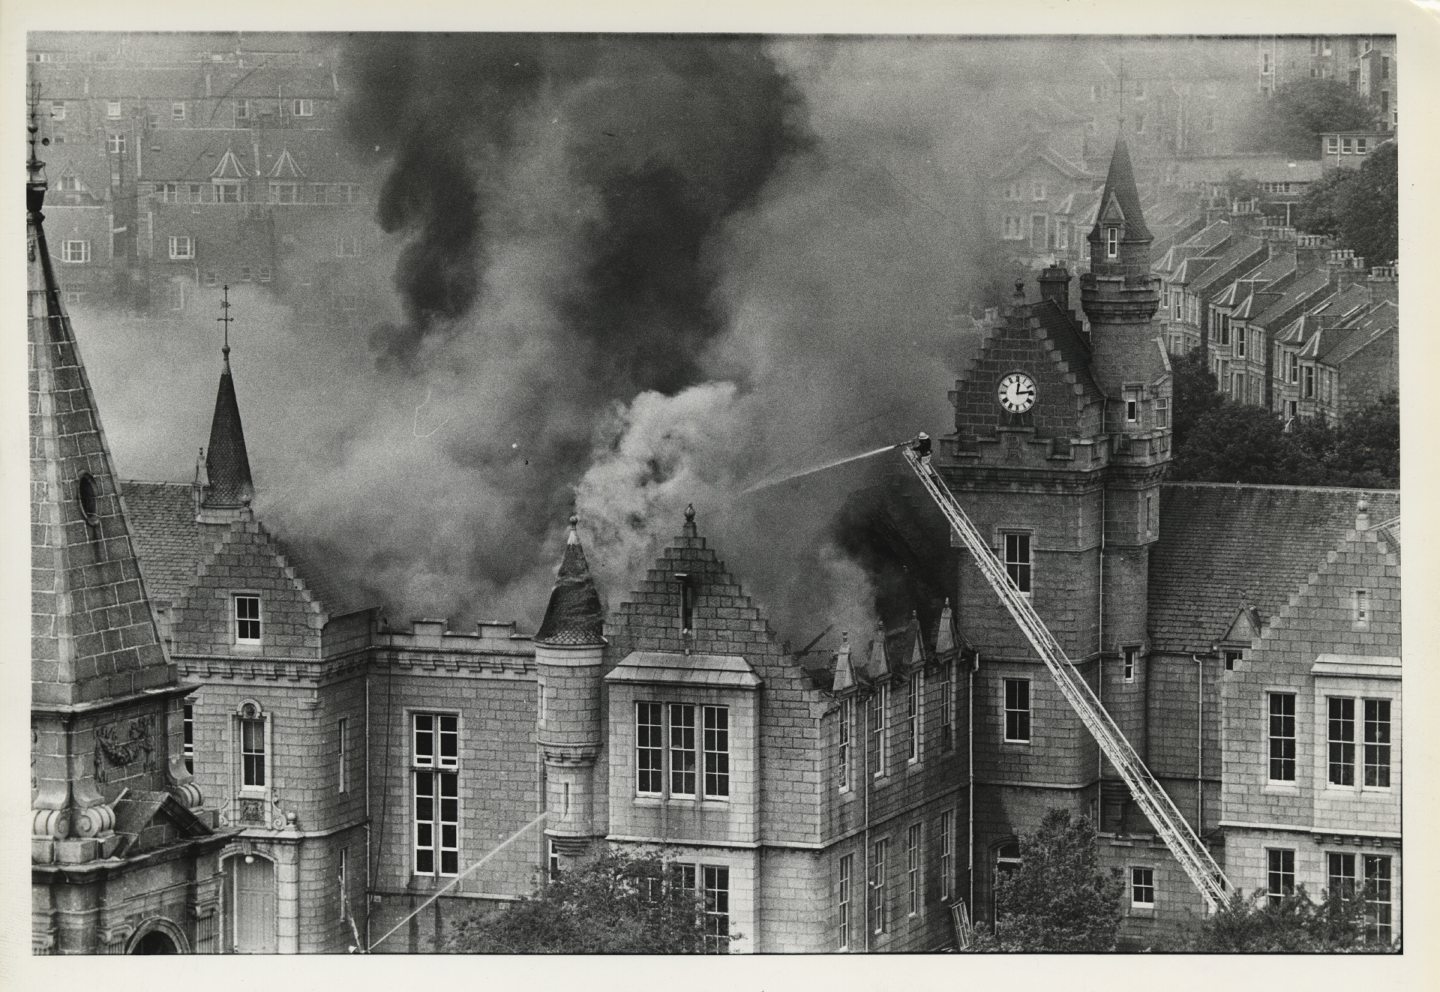 Fireman fighting the fire at the Aberdeen school in 1986.